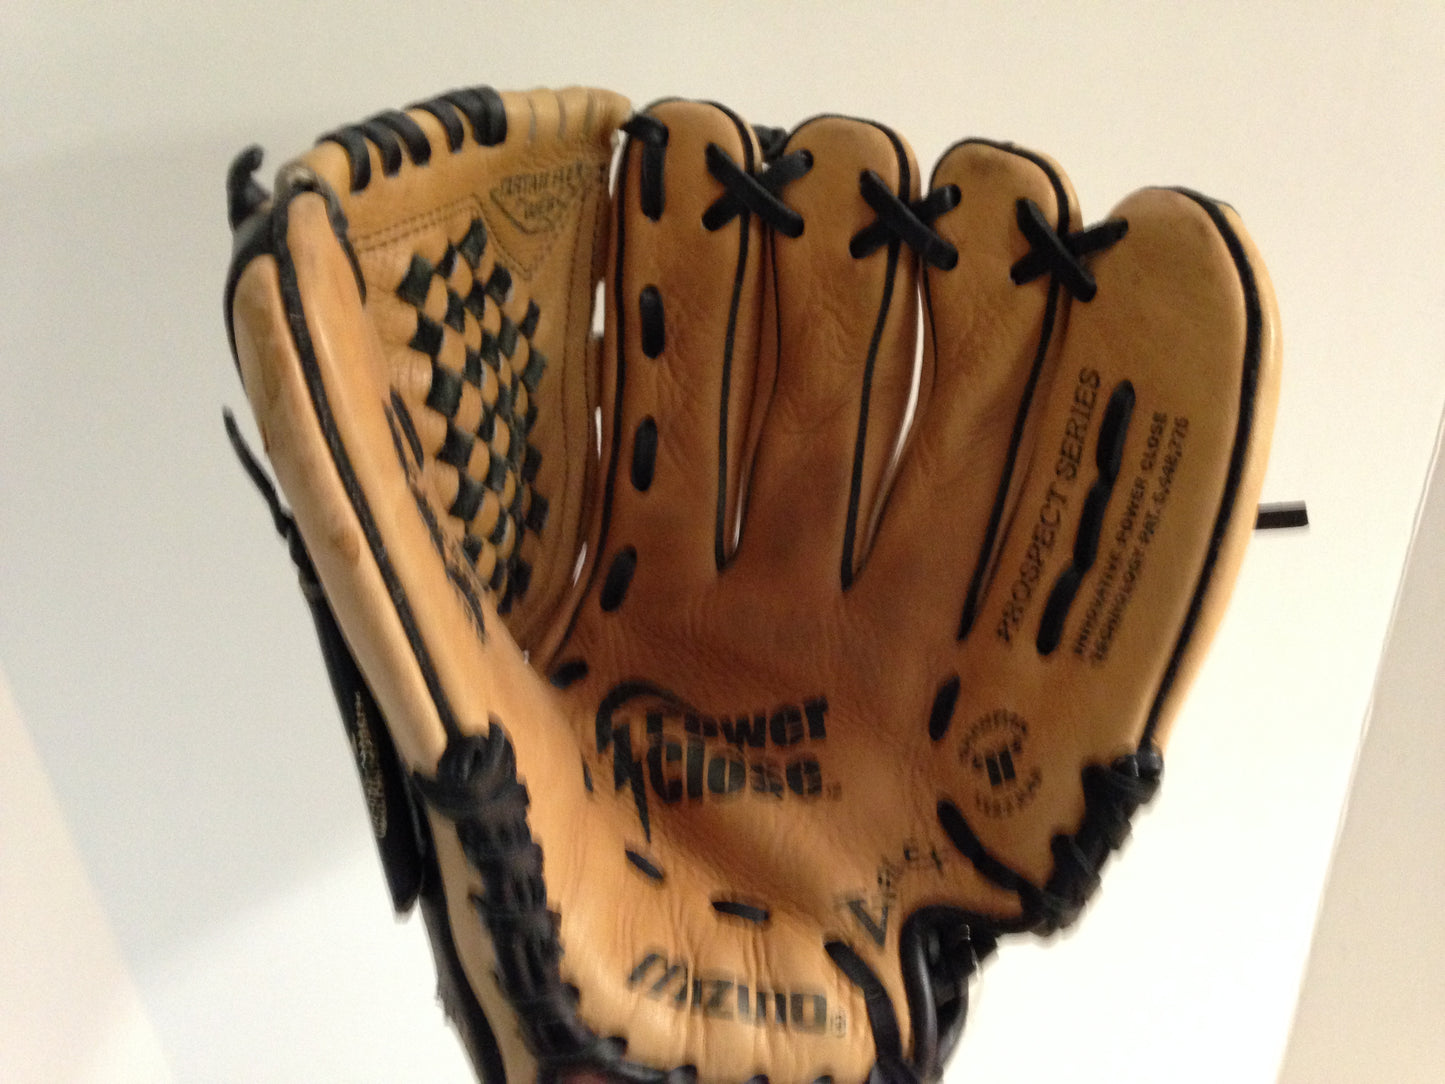 Baseball Glove Adult Size 11.5 inch Mizuno Leather Brown Black Fits on Left Hand